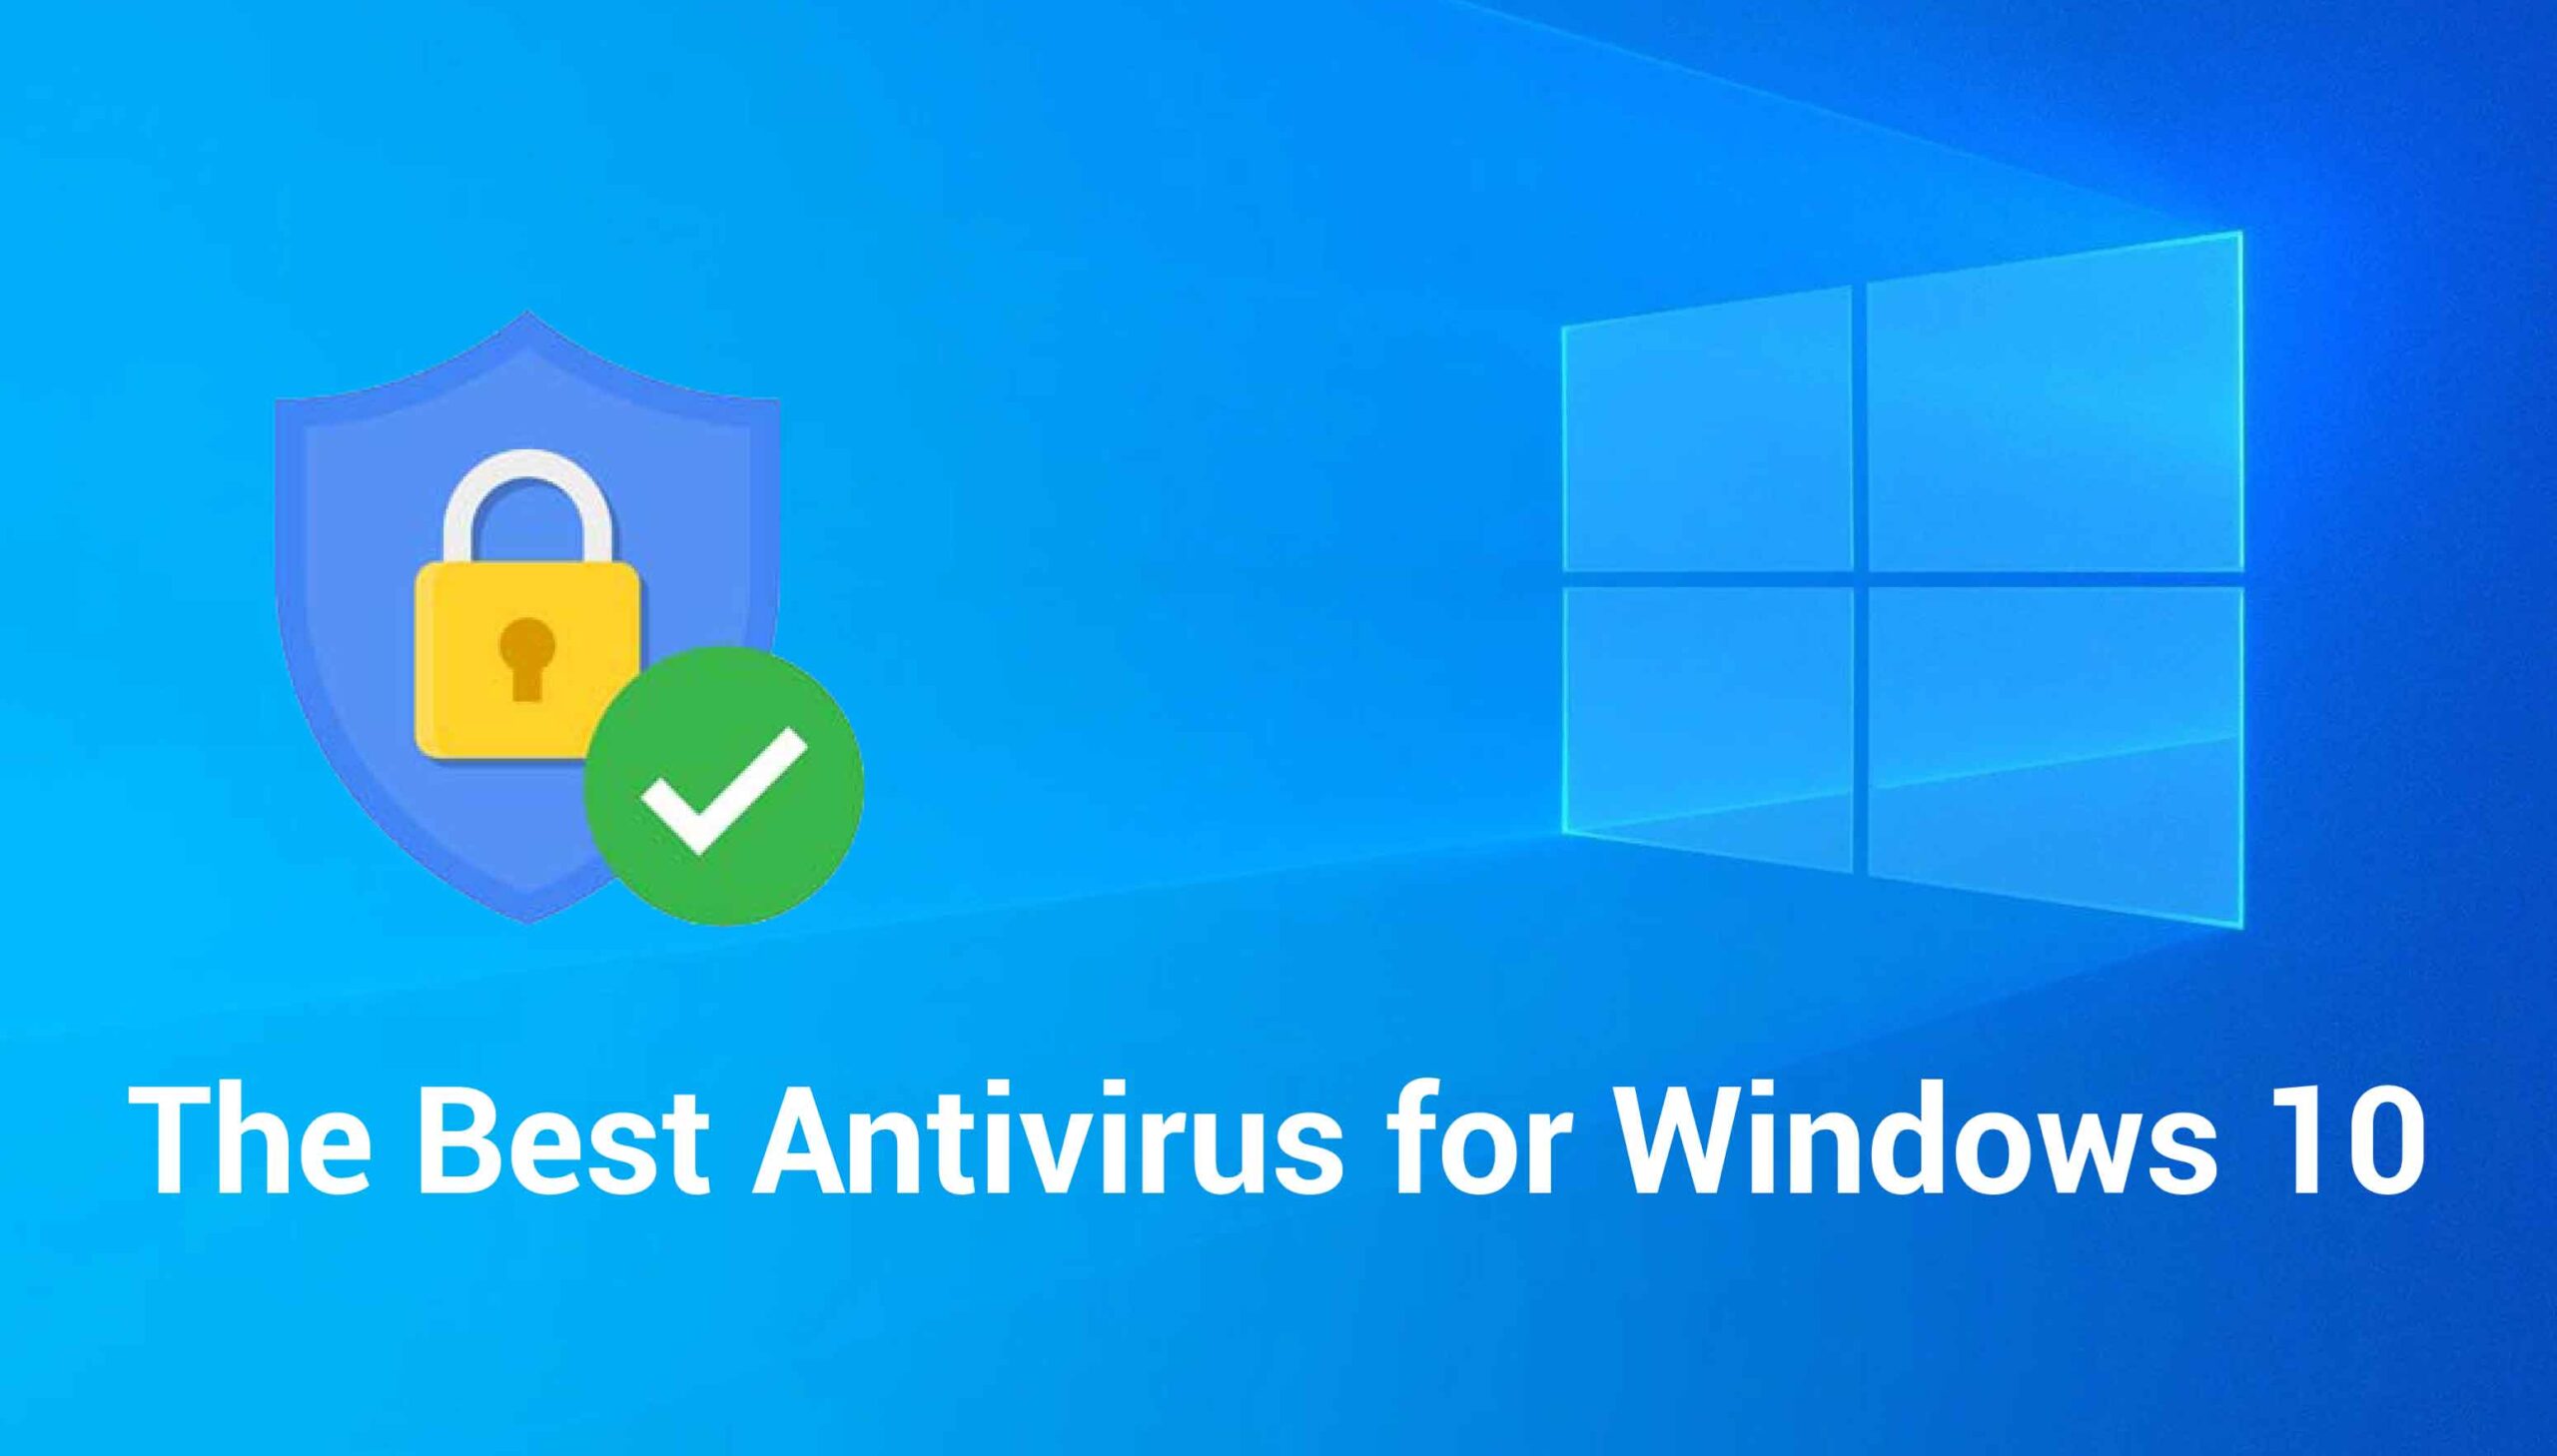 The best antivirus for Windows 10 (and 11) 3